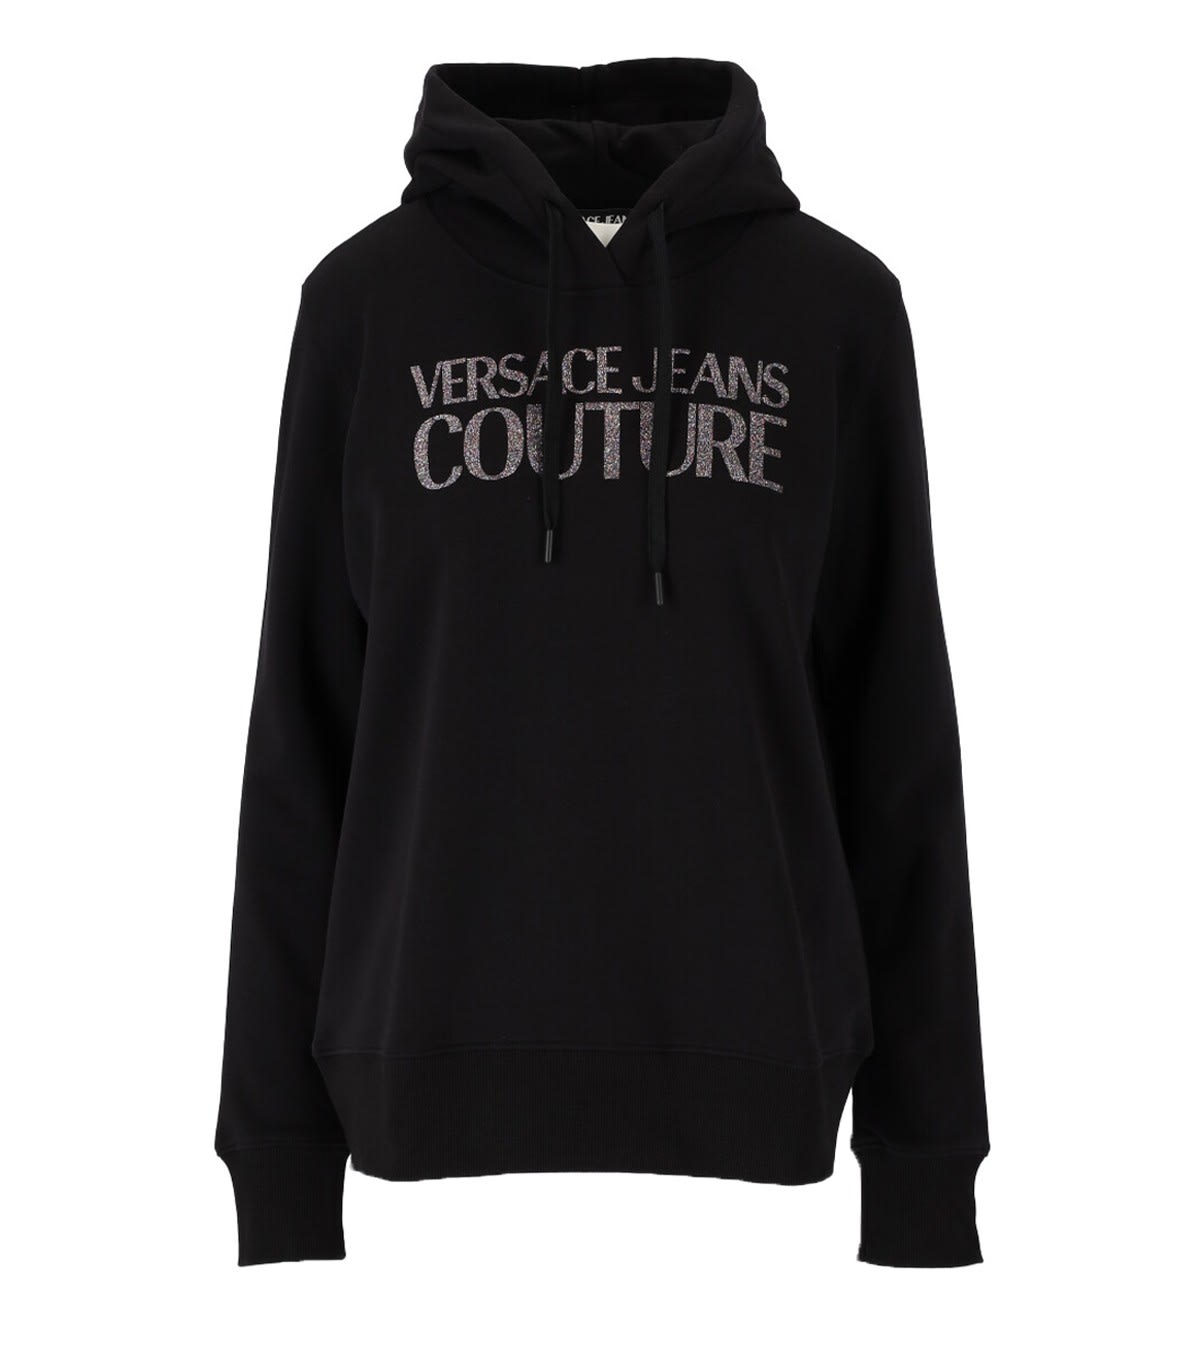 Versace Jeans Couture Logo Glitter Black Hoodie